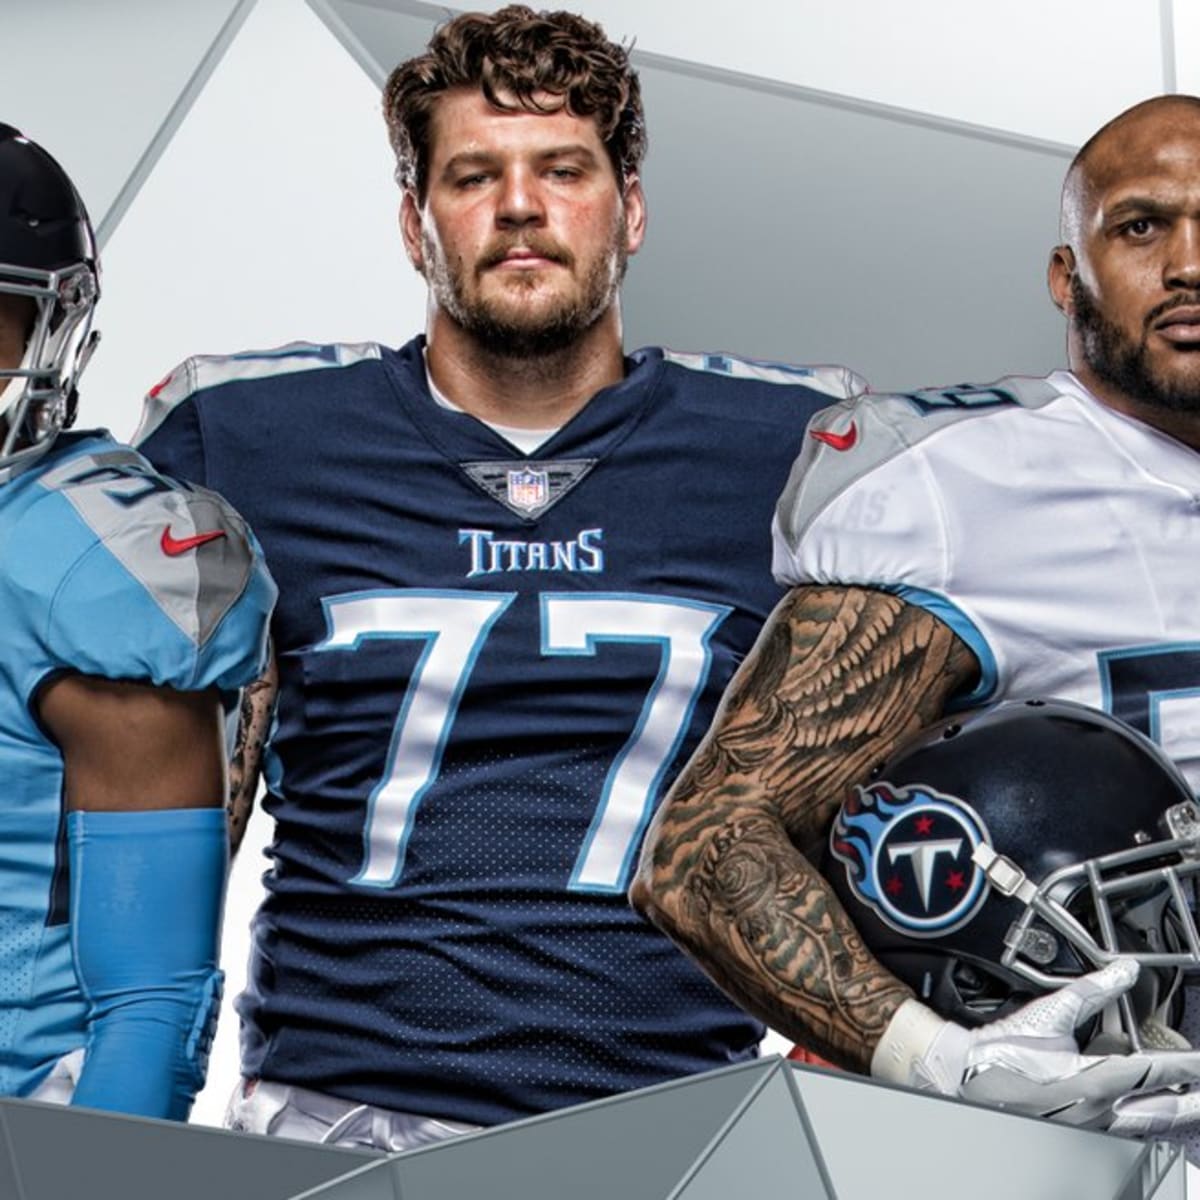 Titans uniforms unveiled during street party on Broadway